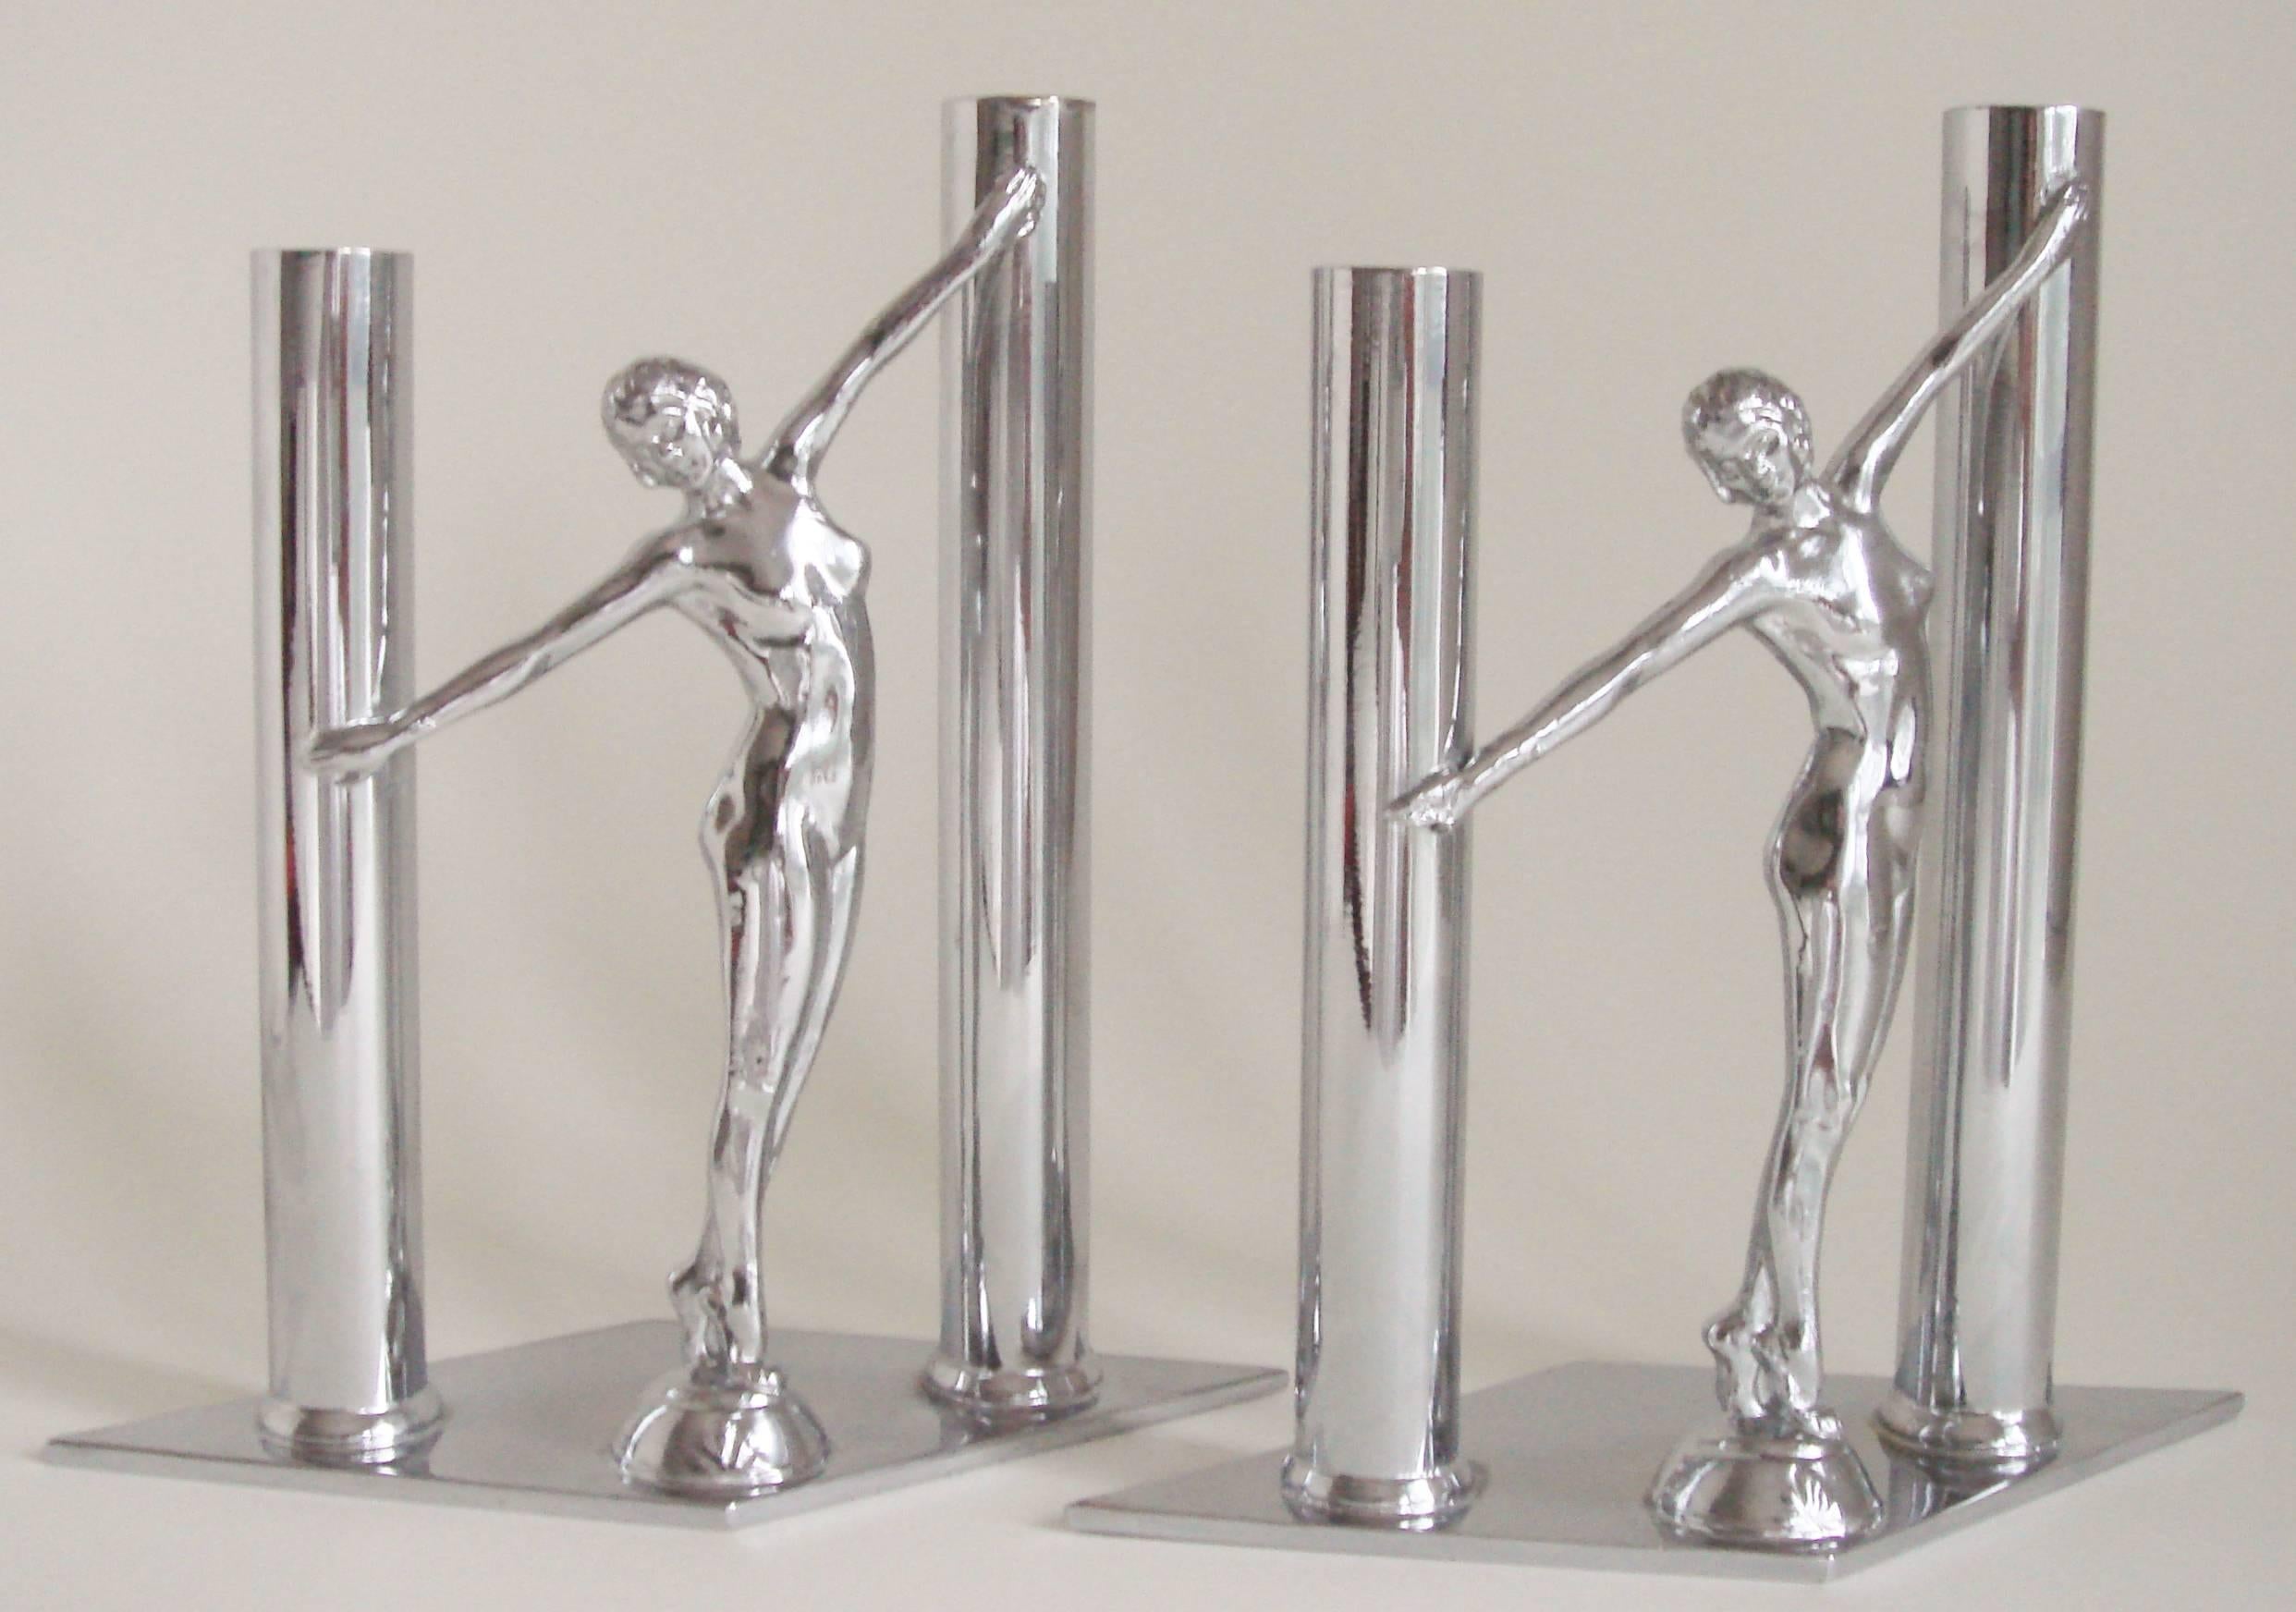 This elegant pair of American Art Deco chrome-plated figural bud vases feature two tubular vases of different heights either side of a female nude with arms outstretched. These figures each stand on small pedestals with a floral design and these in